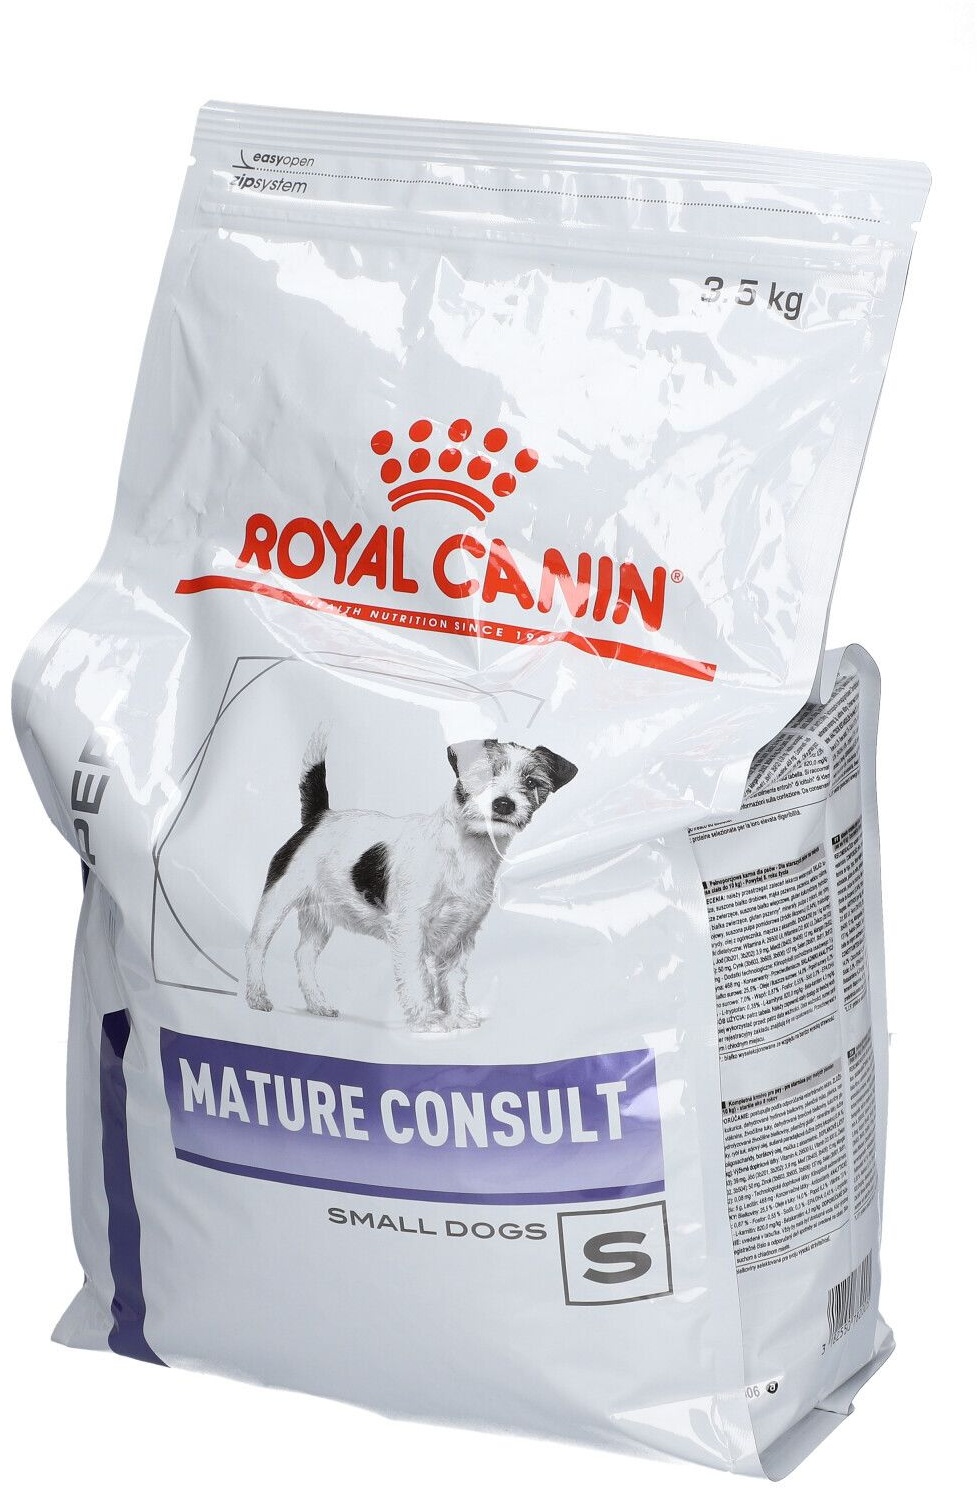 ROYAL CANIN® Mature Consult Small Dog 3500 g pellet(s)